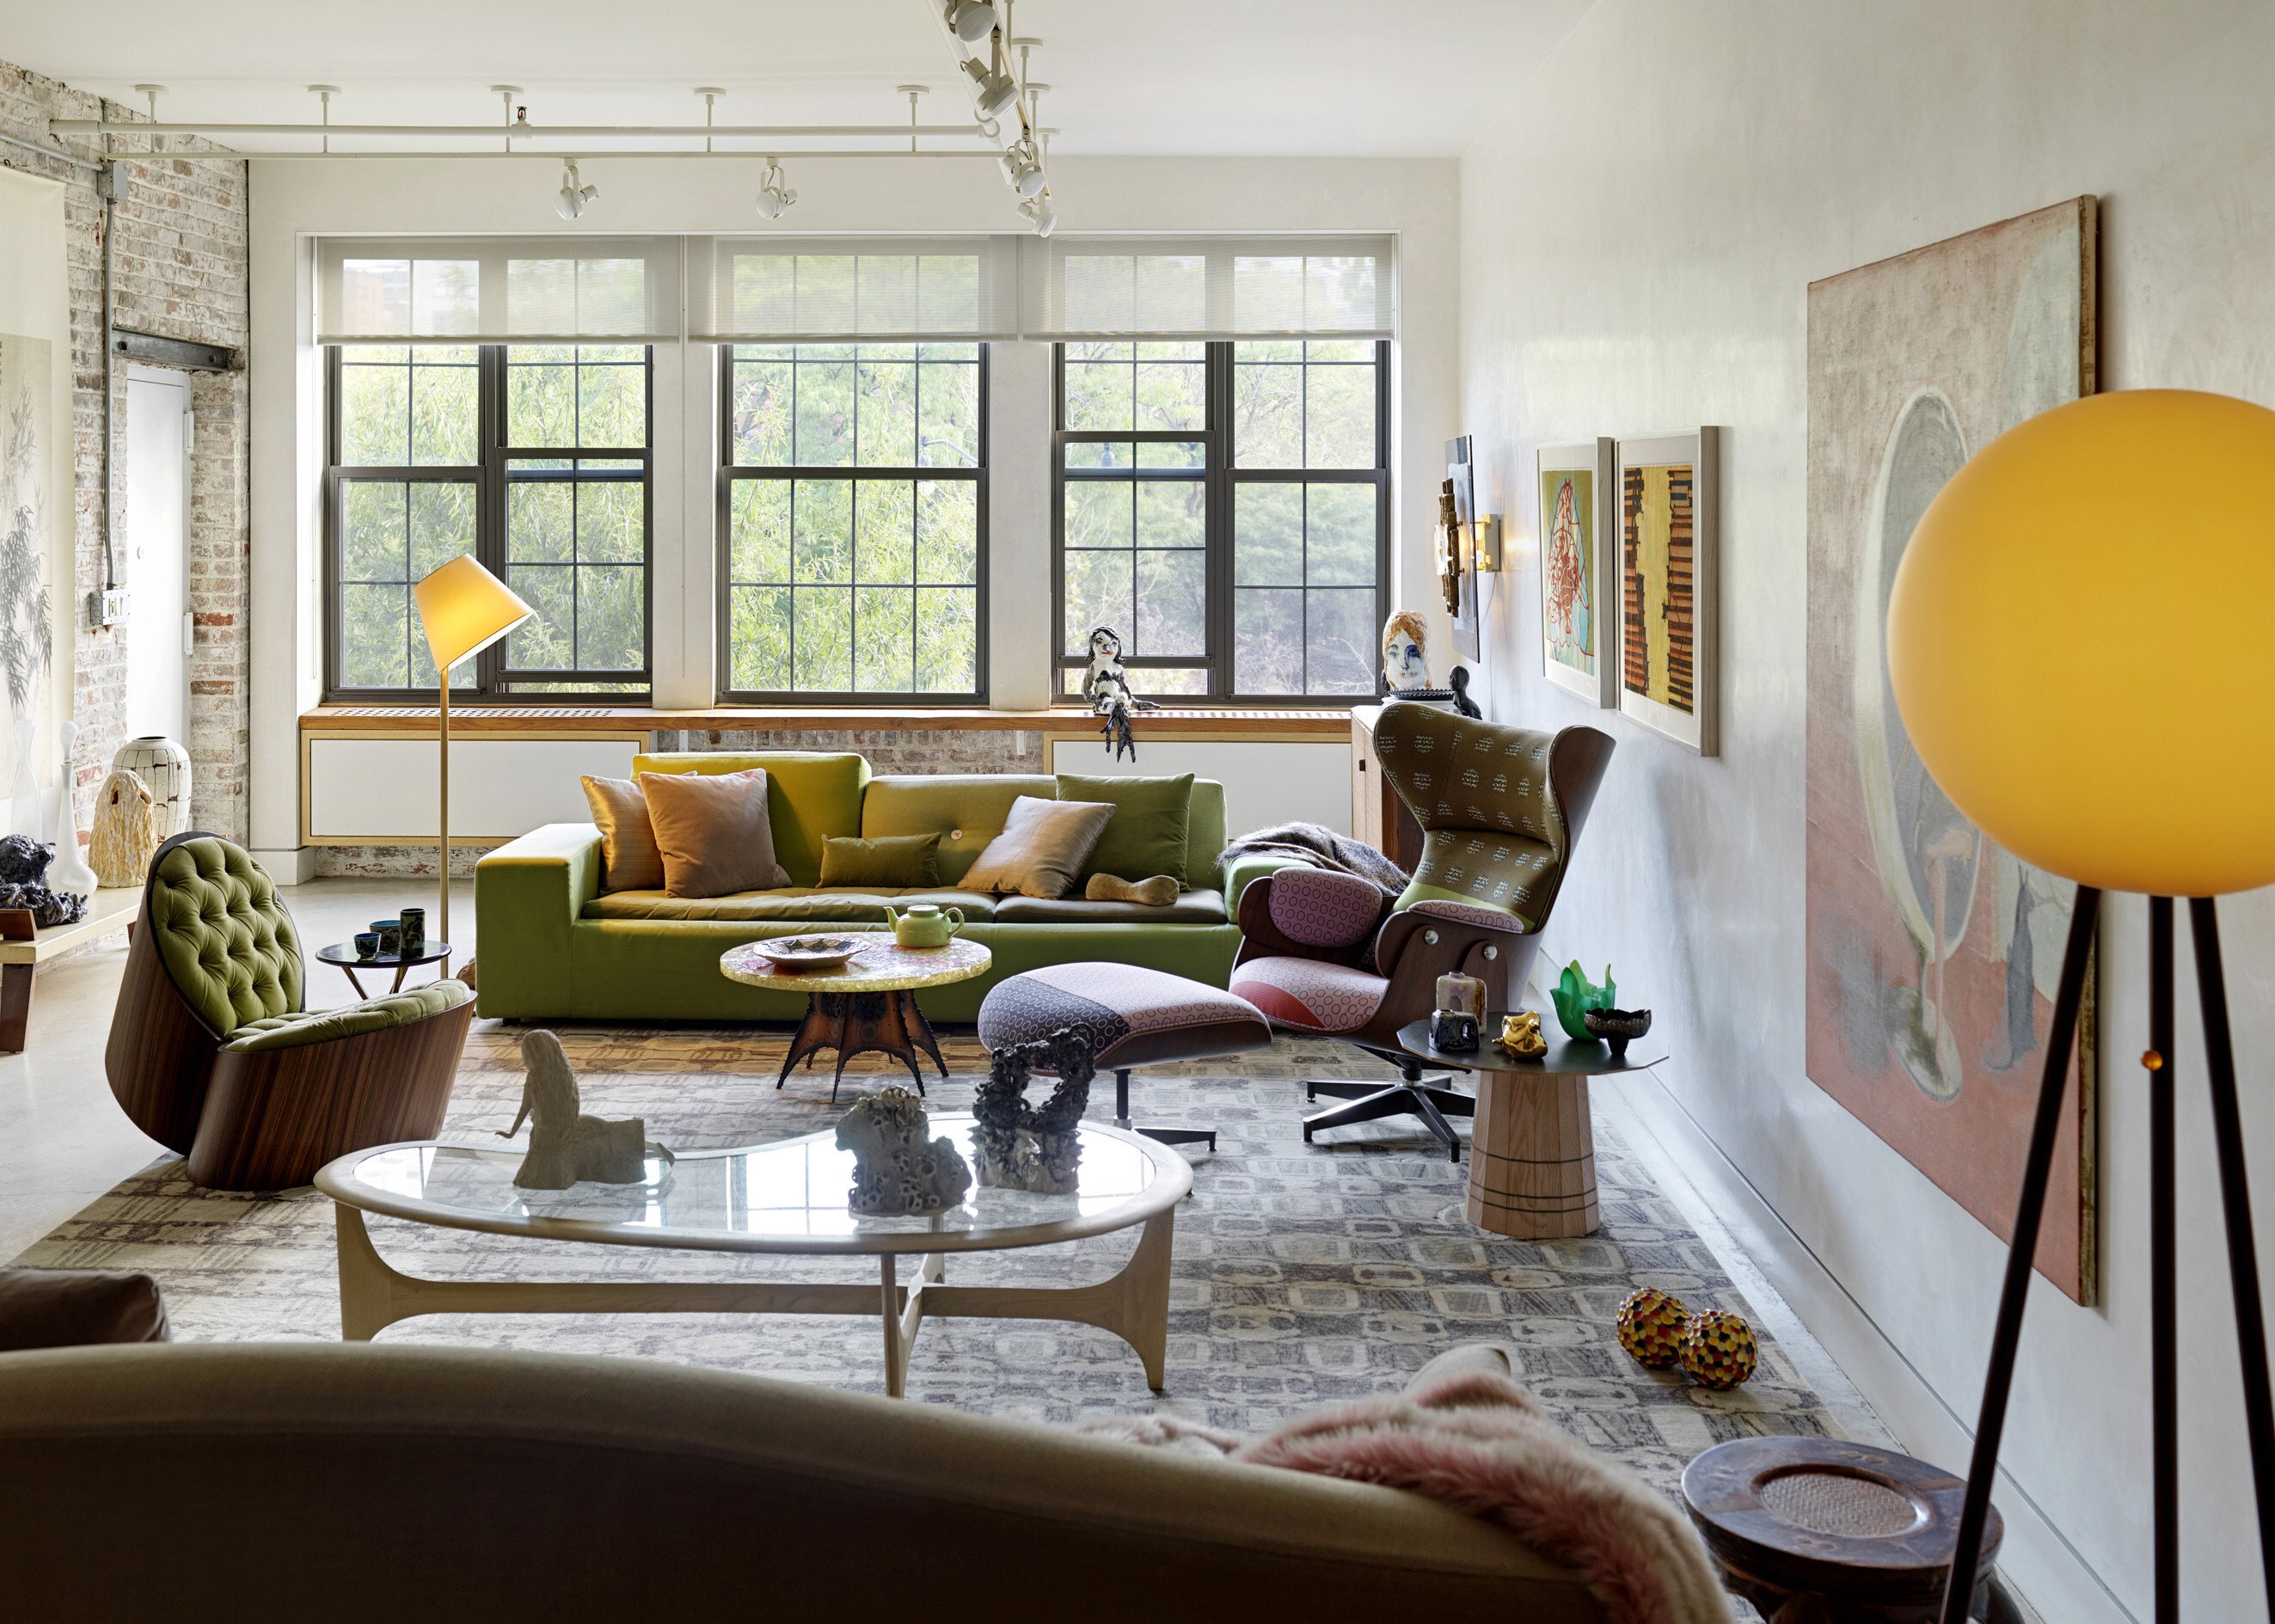 In the spacious New York loft of Janis Provisor and Brad Davis, furniture is clustered to create intimate areas. Photo: Jonathan Leijonhufvud